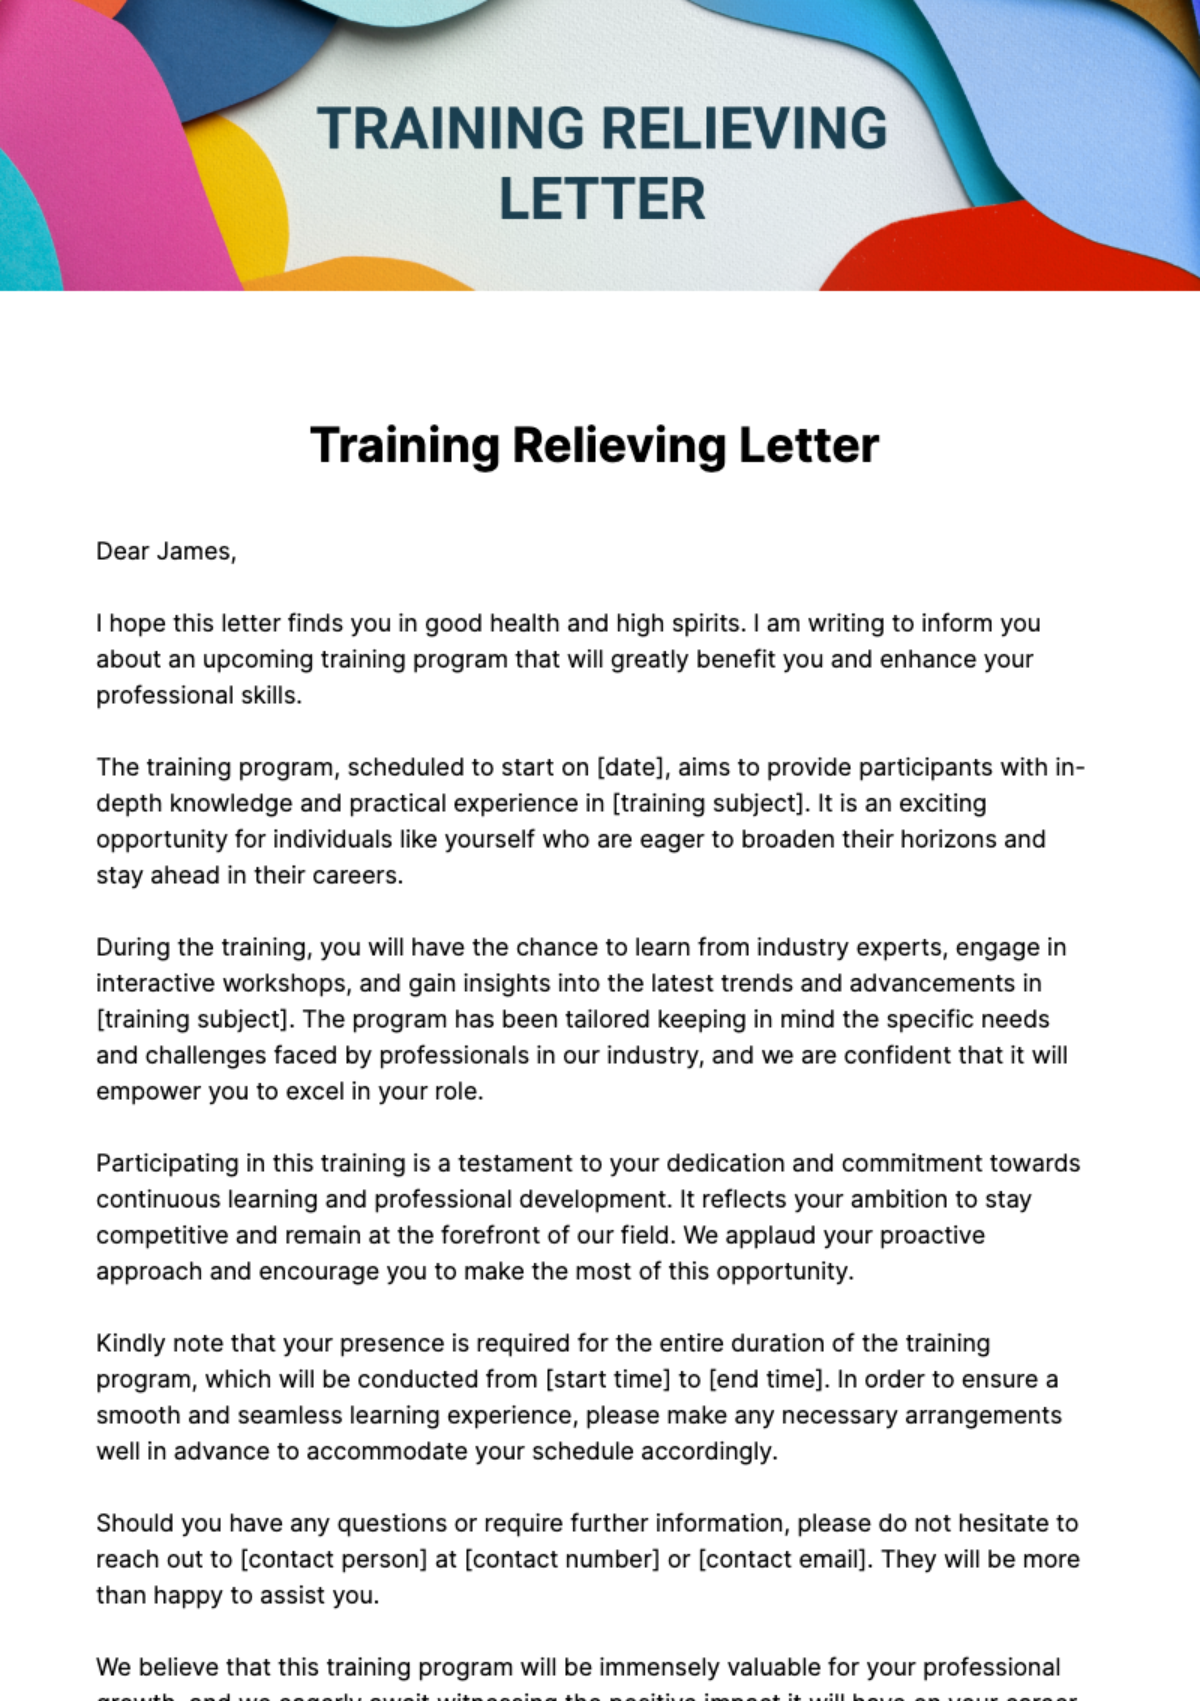 Training Relieving Letter Template